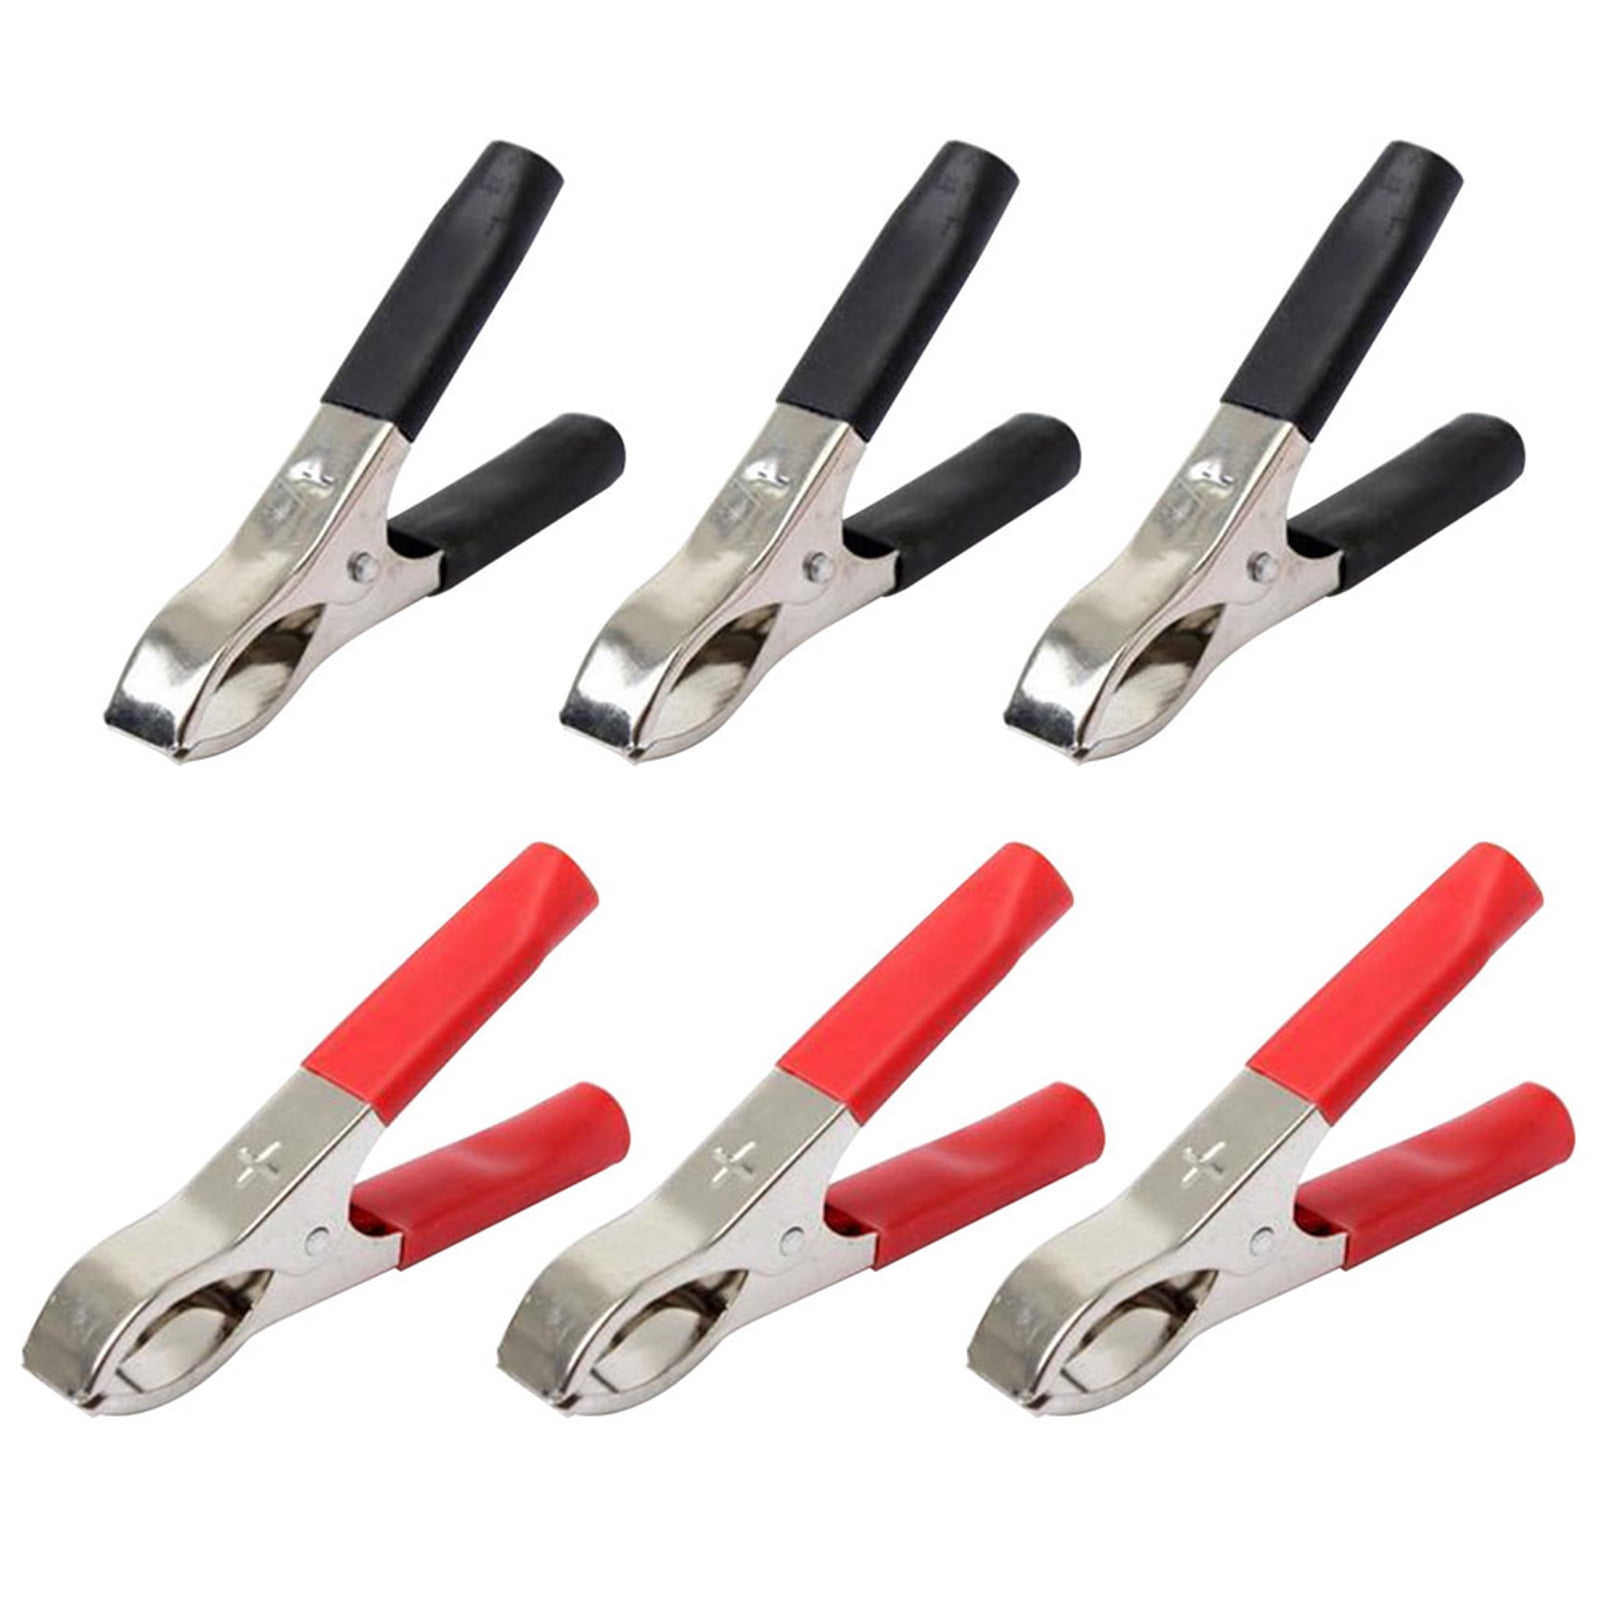 Details about   2pcs Copper Insulated Alligator Clips Red Black Testing Clamps For Car Battery 